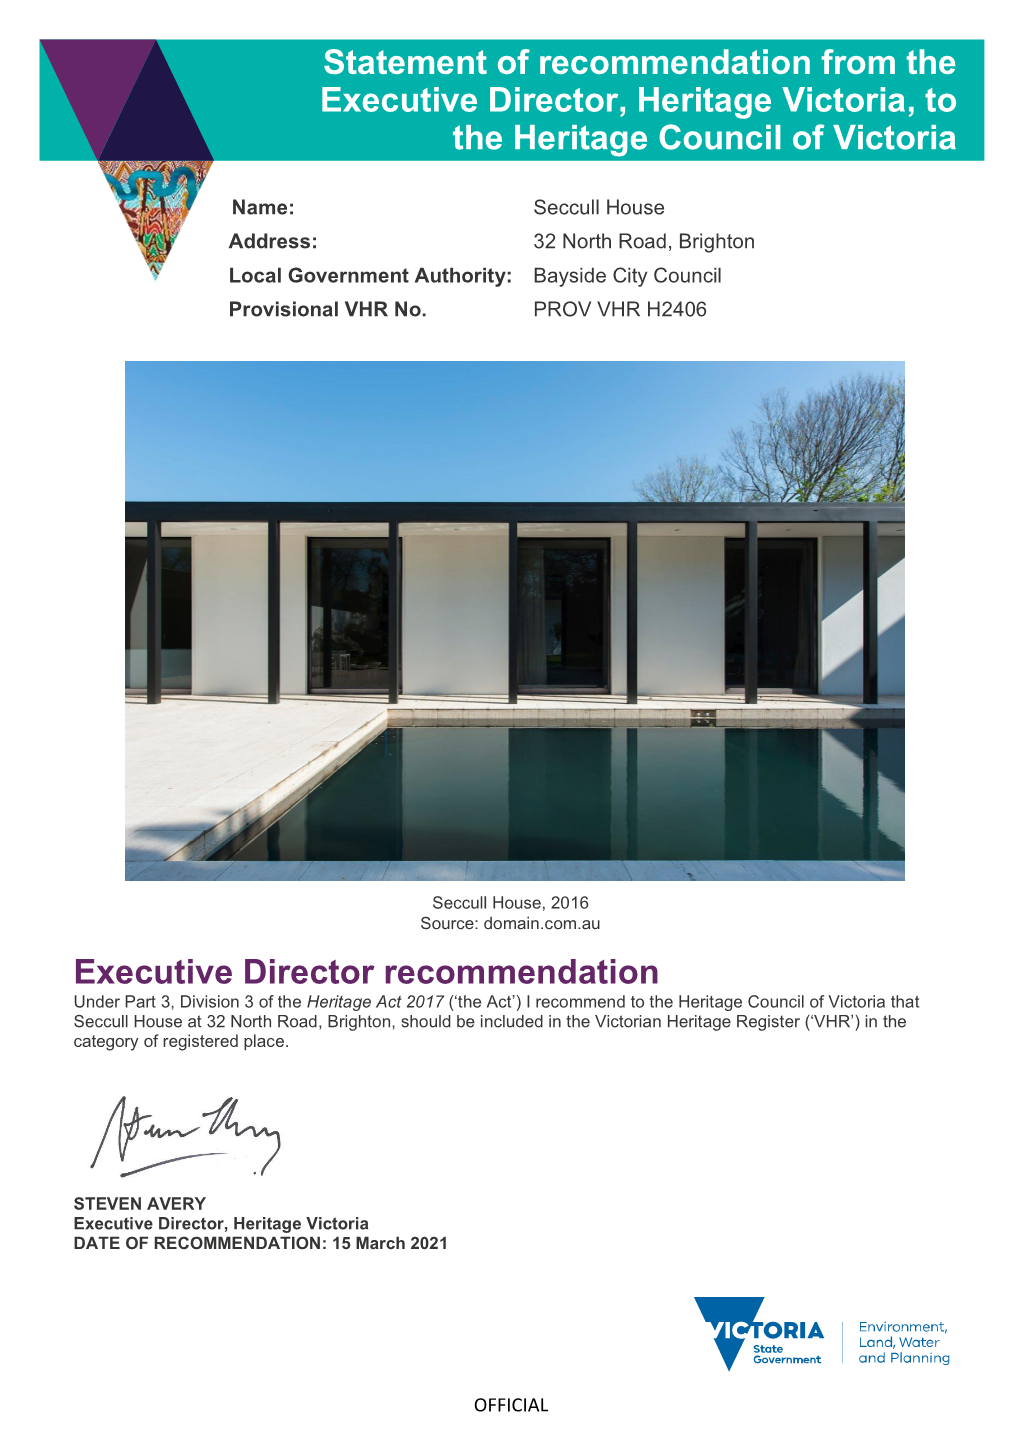 Executive Director Recommendation